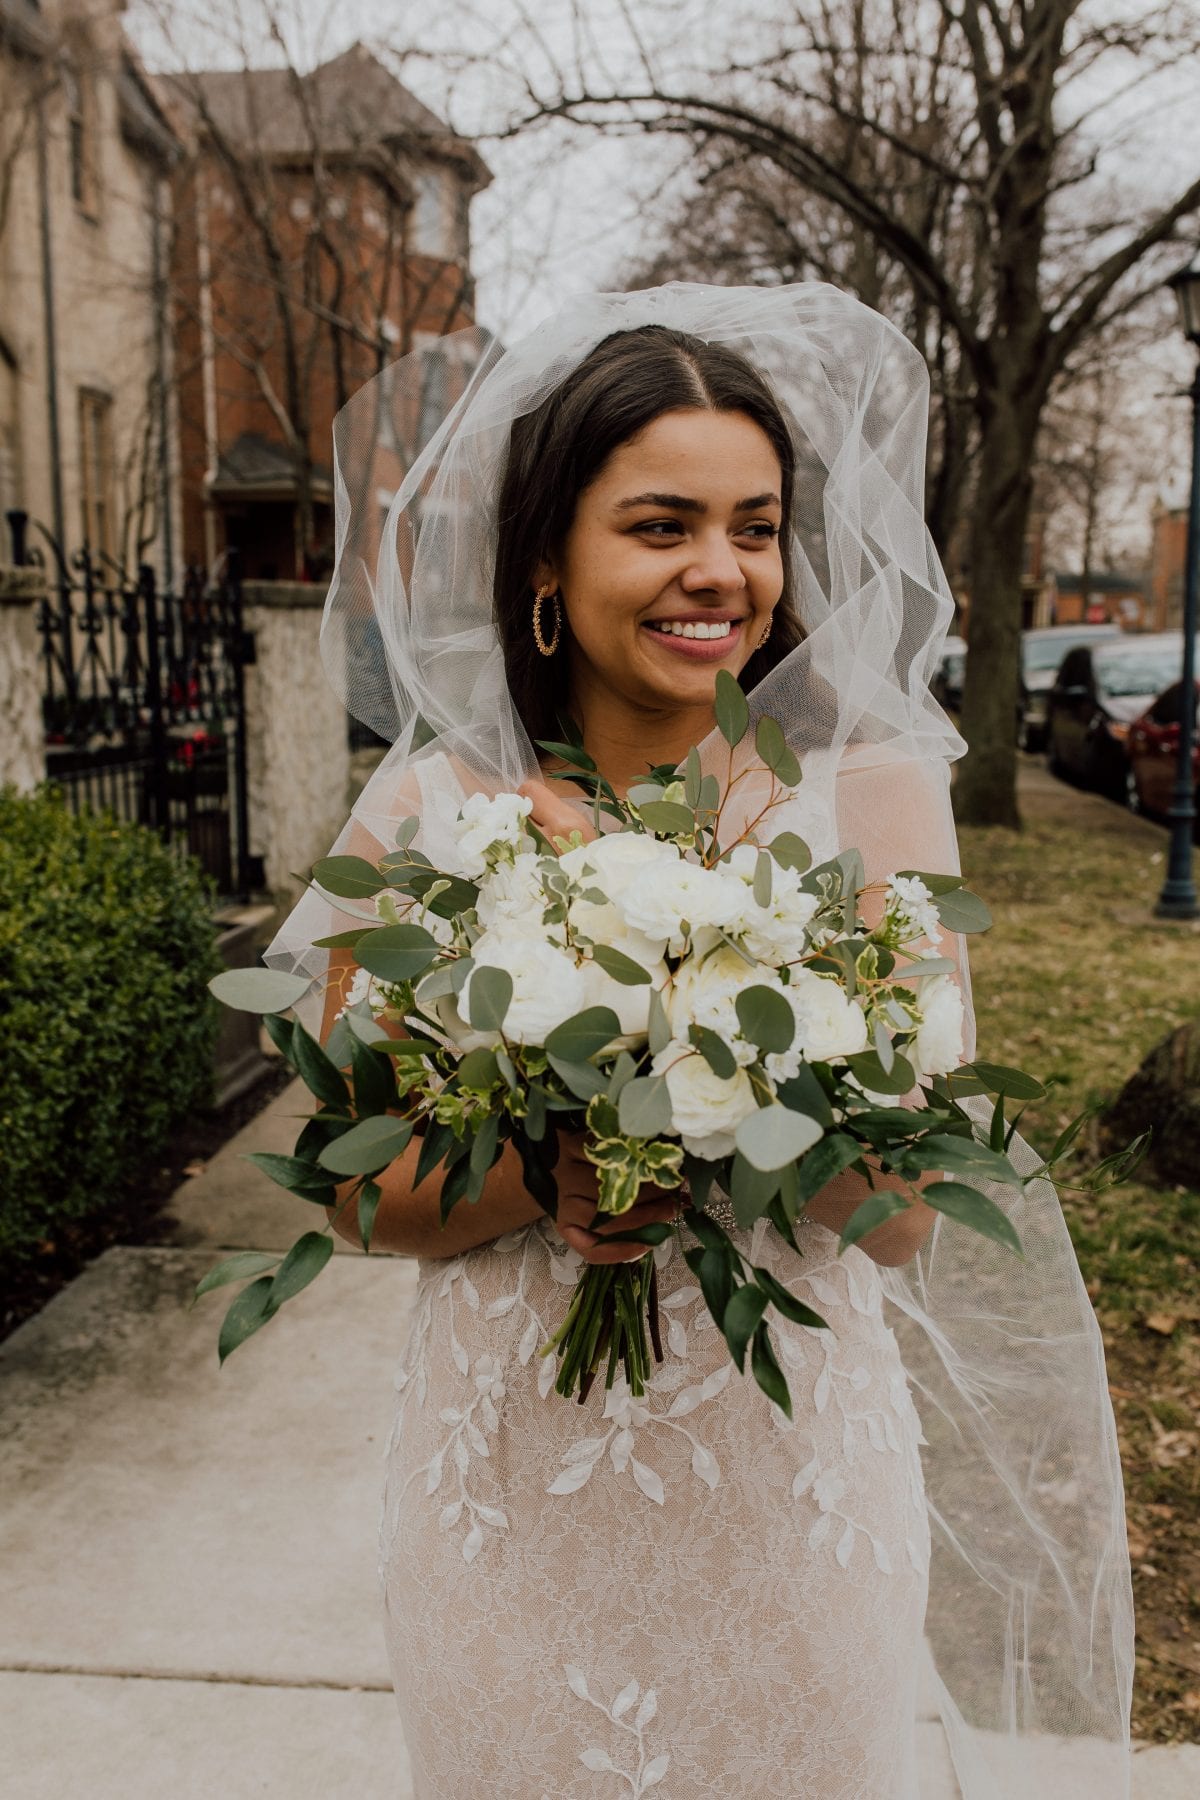 Bride laughs as wind blows her veil